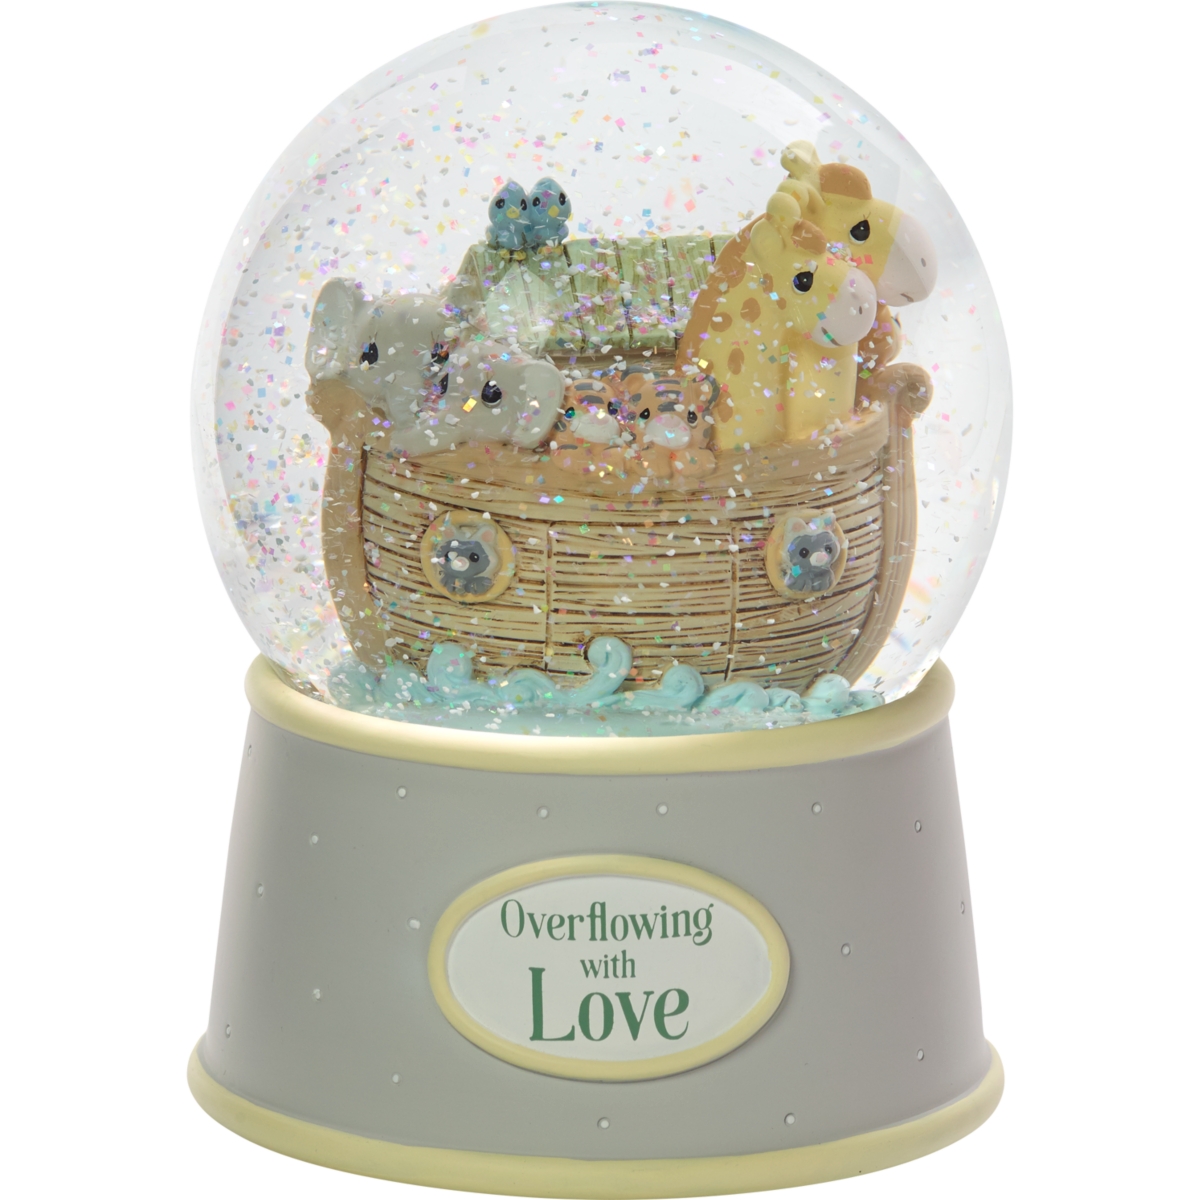 Overflowing With Love Noah's Ark Musical Snow Globe - Multi